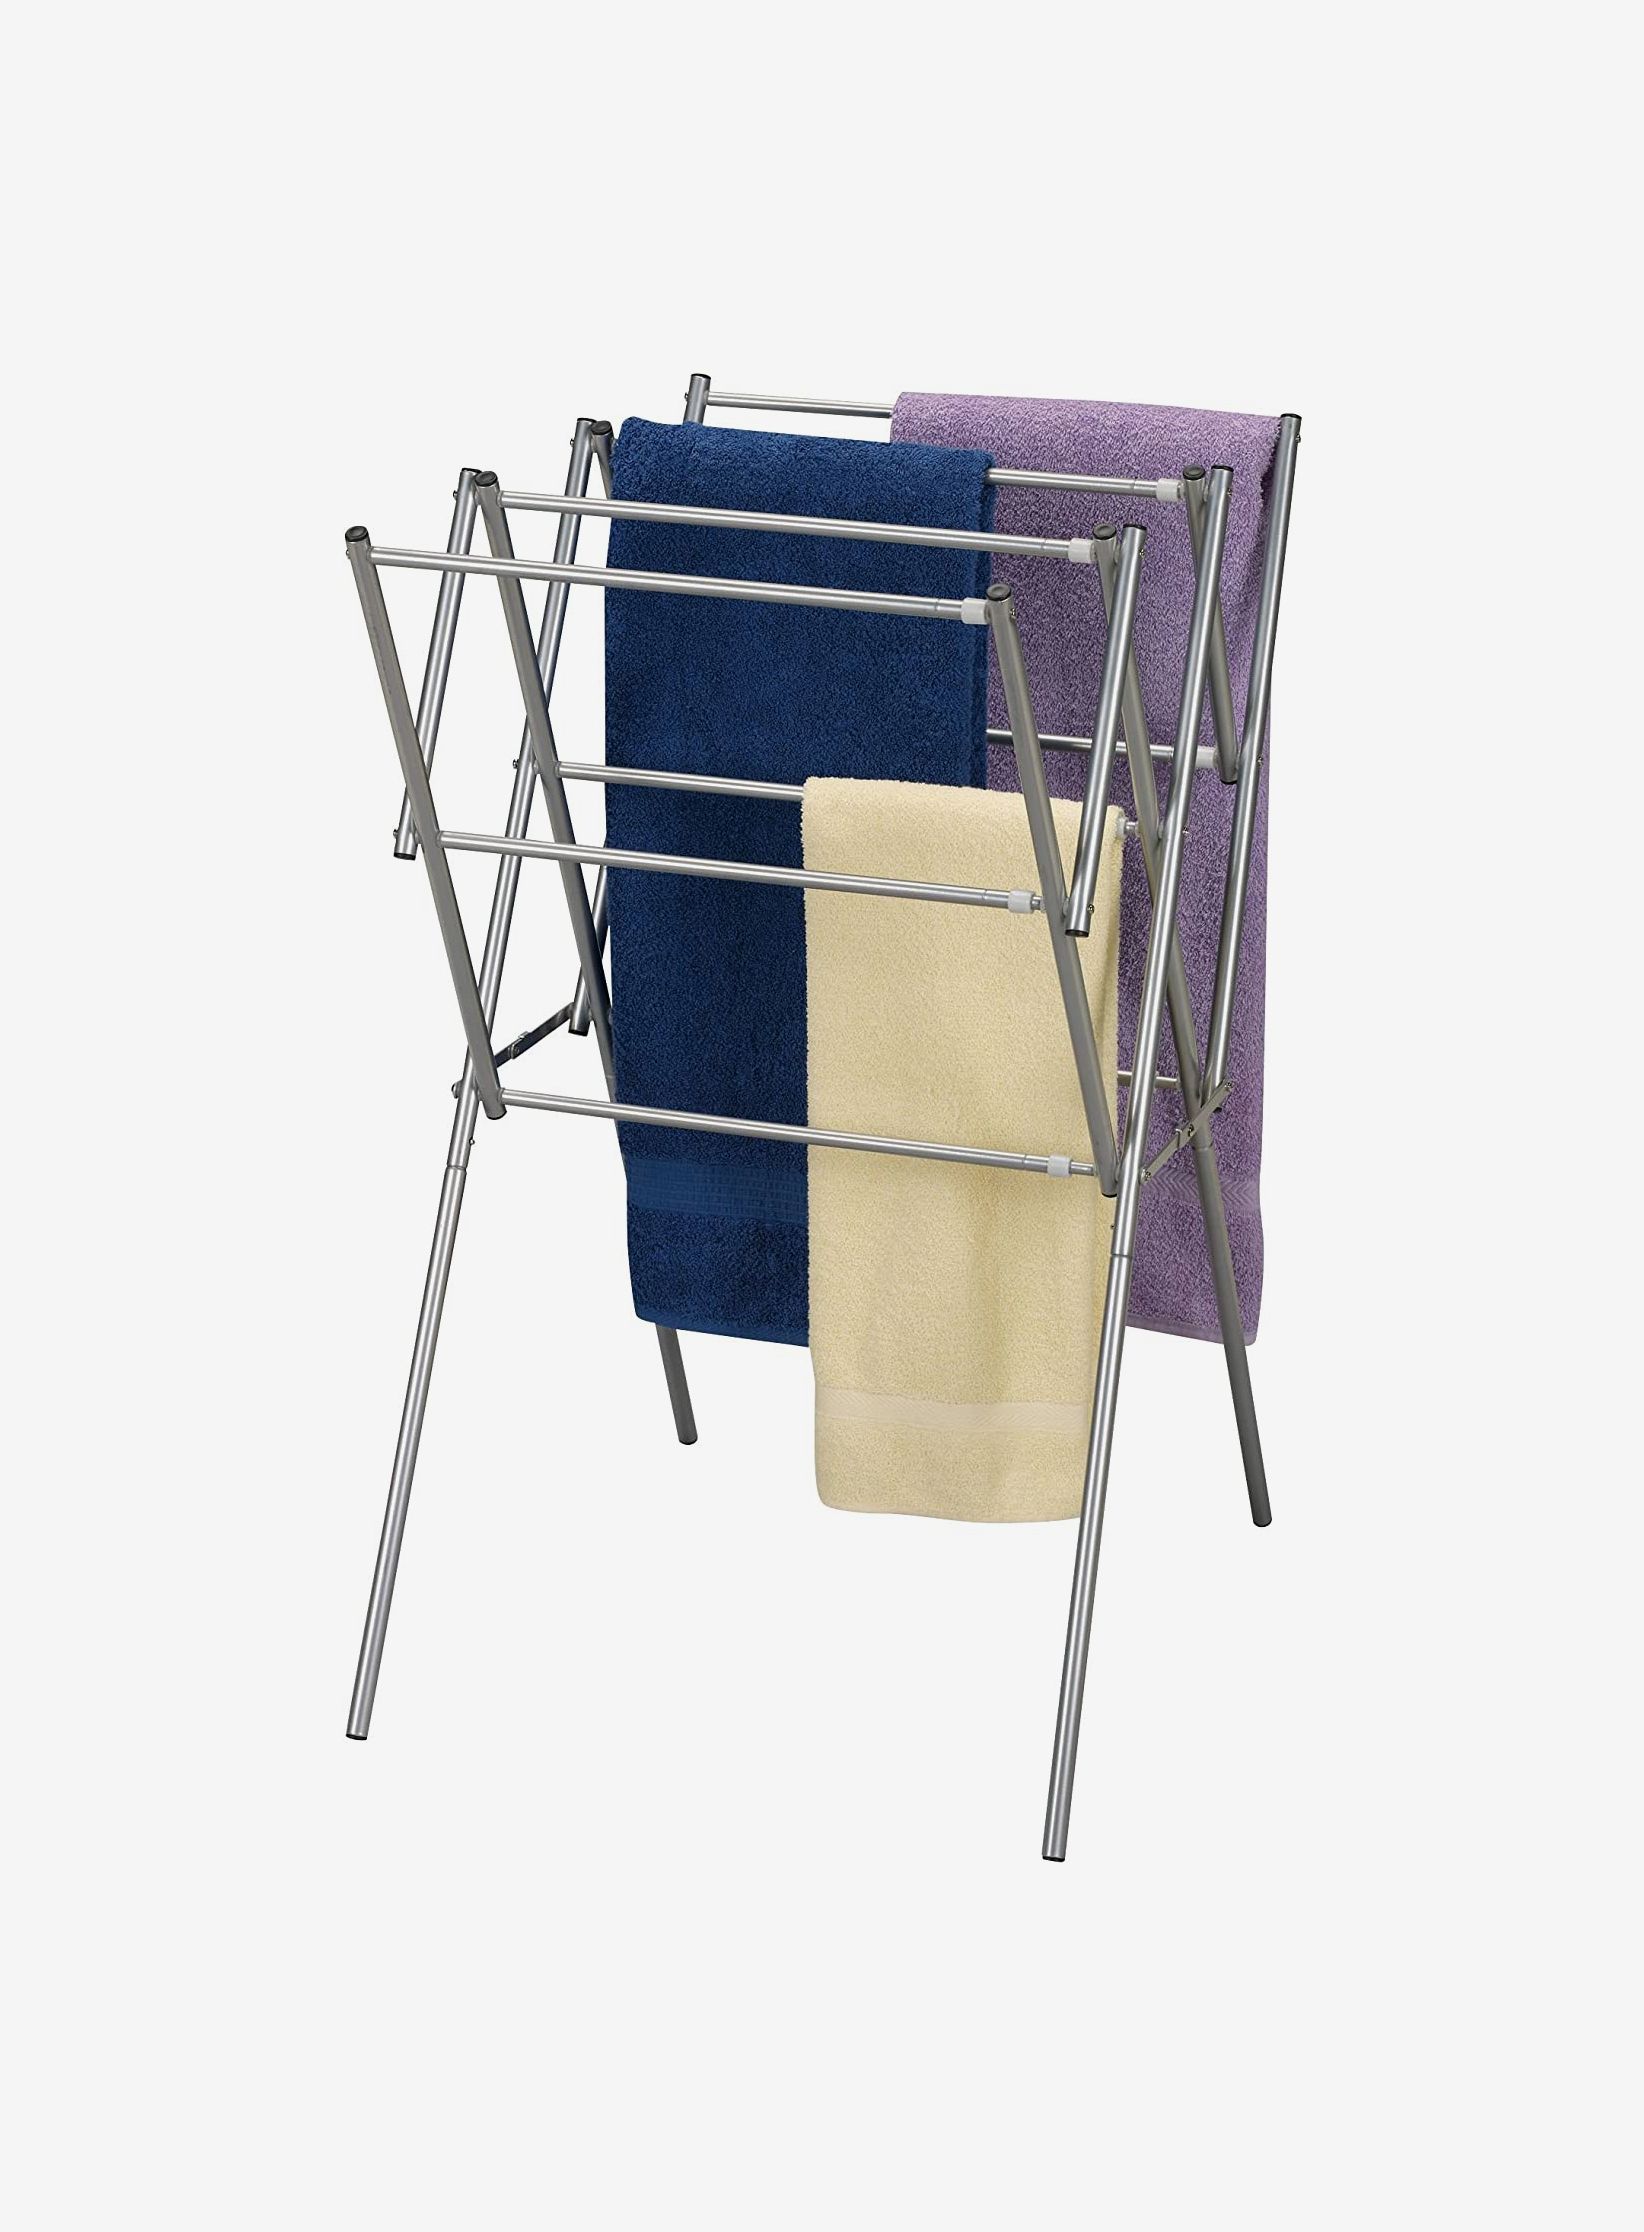 Electric Clothes Drying Rack Portable Dryer Hanger Folding Travel Laundry 